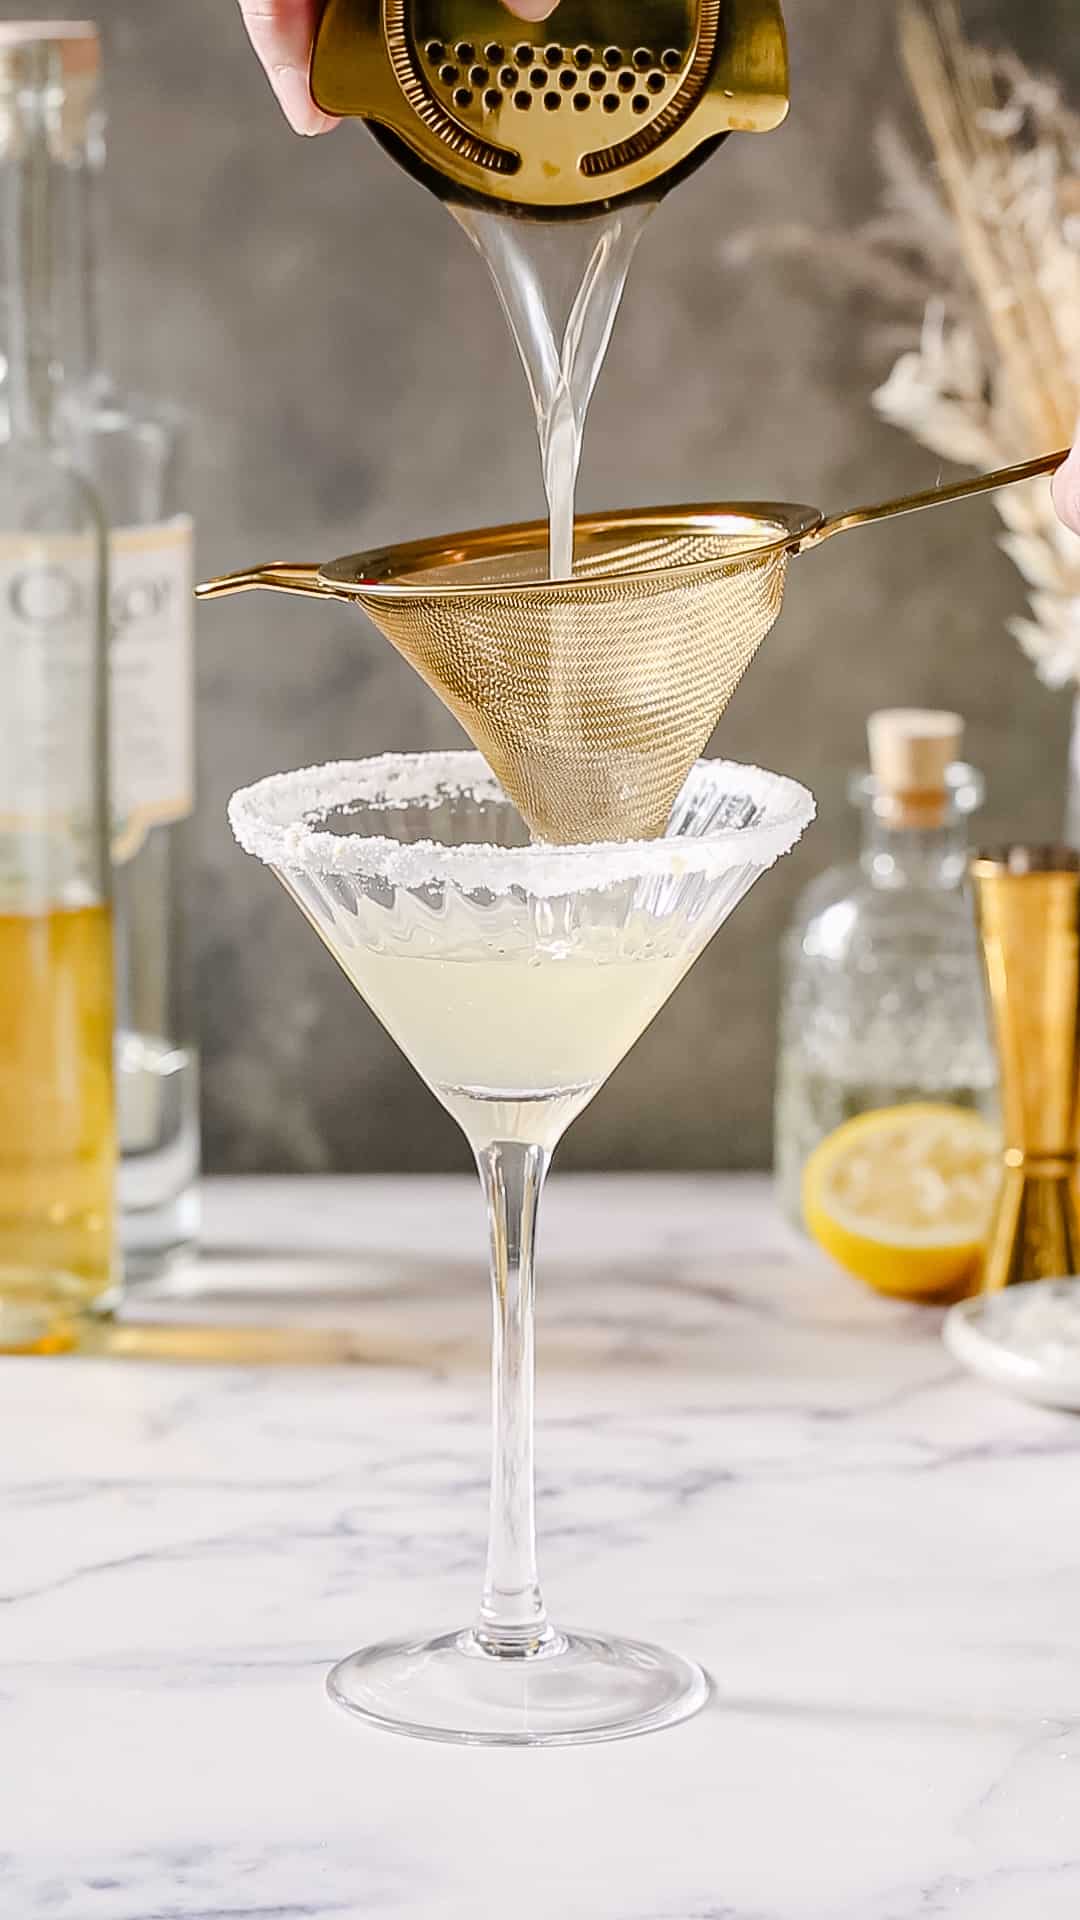 Hands using two strainers to strain a cocktail into a martini glass with a sugared rim.